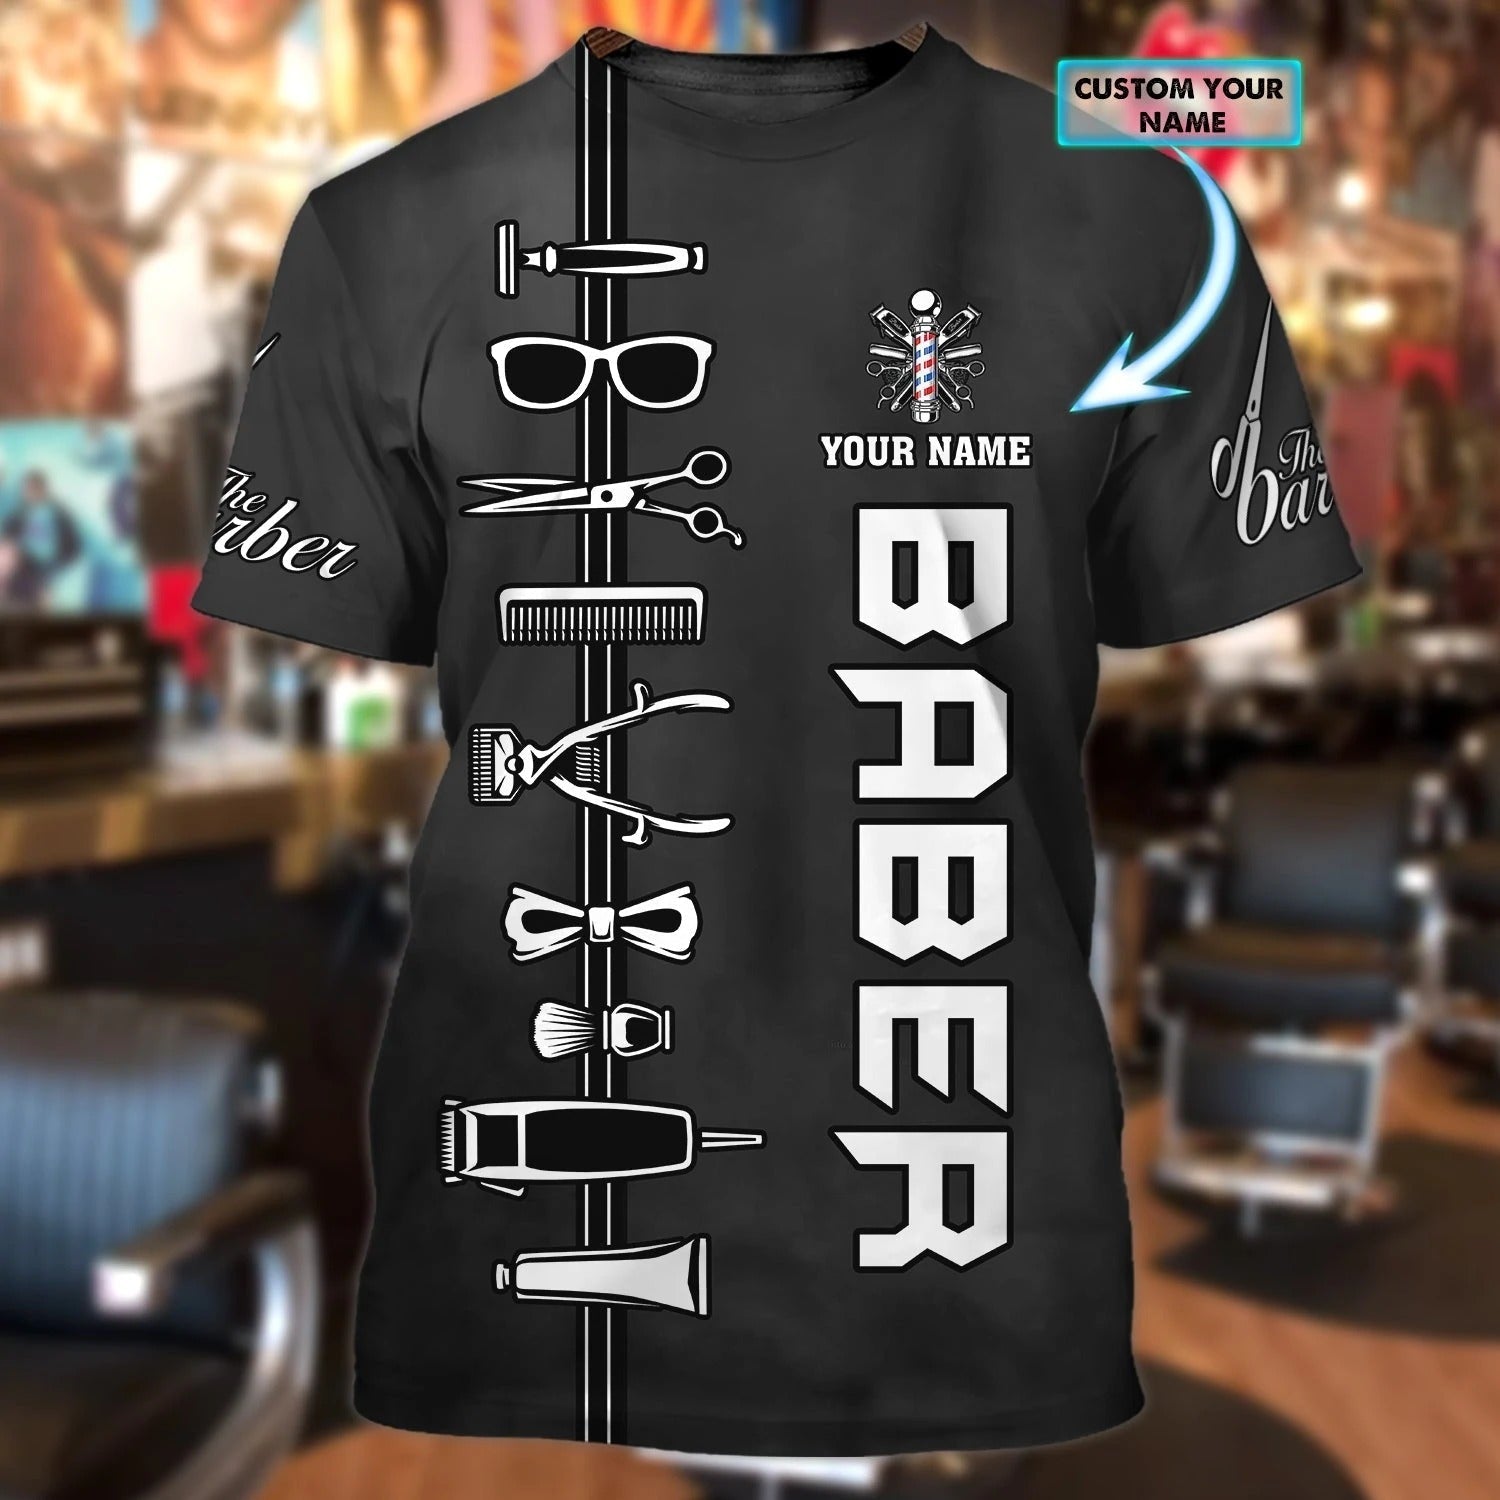 Customized  3D Sublimation Barber Shirts/ Barber Gift For Her/ Unisex 3D Barber Shirt/ Cool Barber Gifts